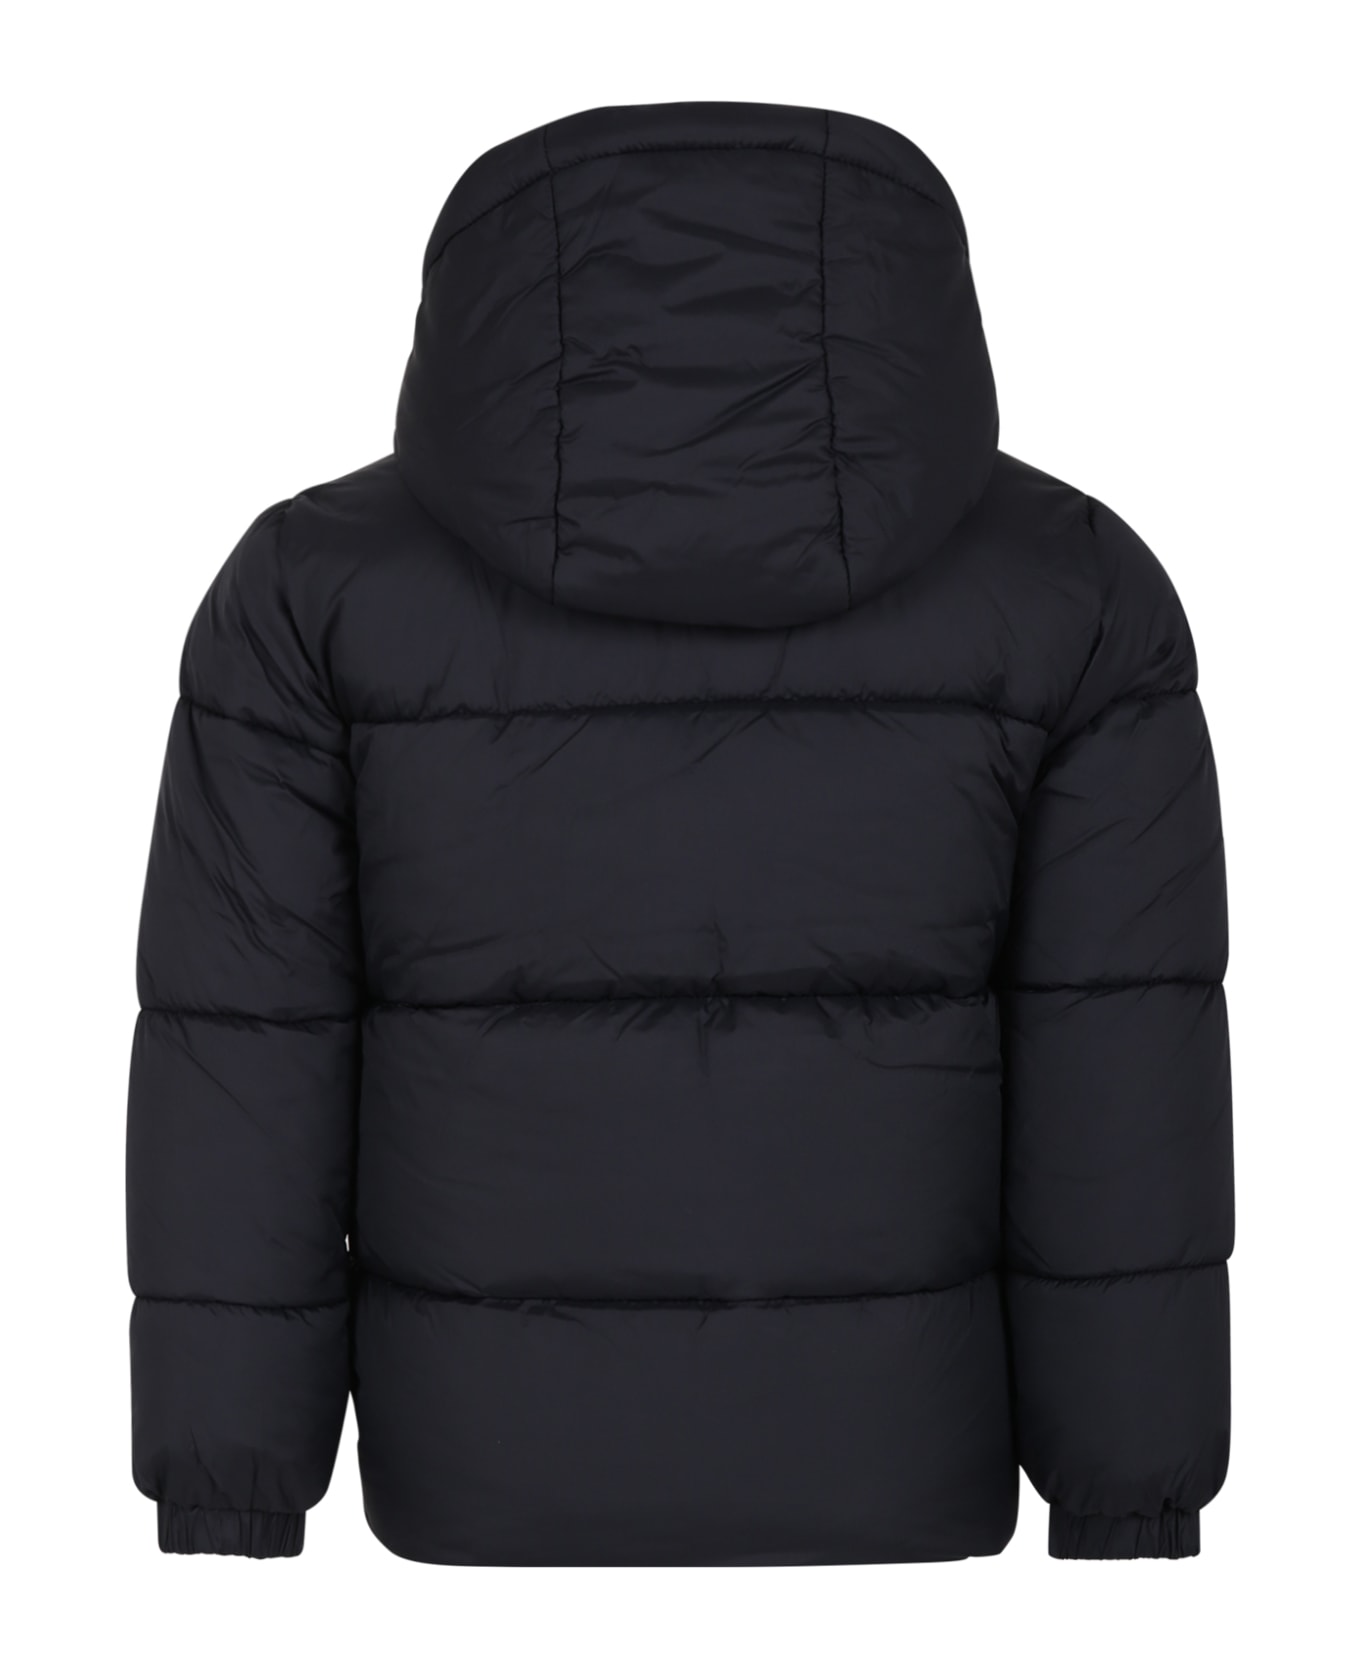 Timberland Black Down Jacket For Boy With Tree - Black